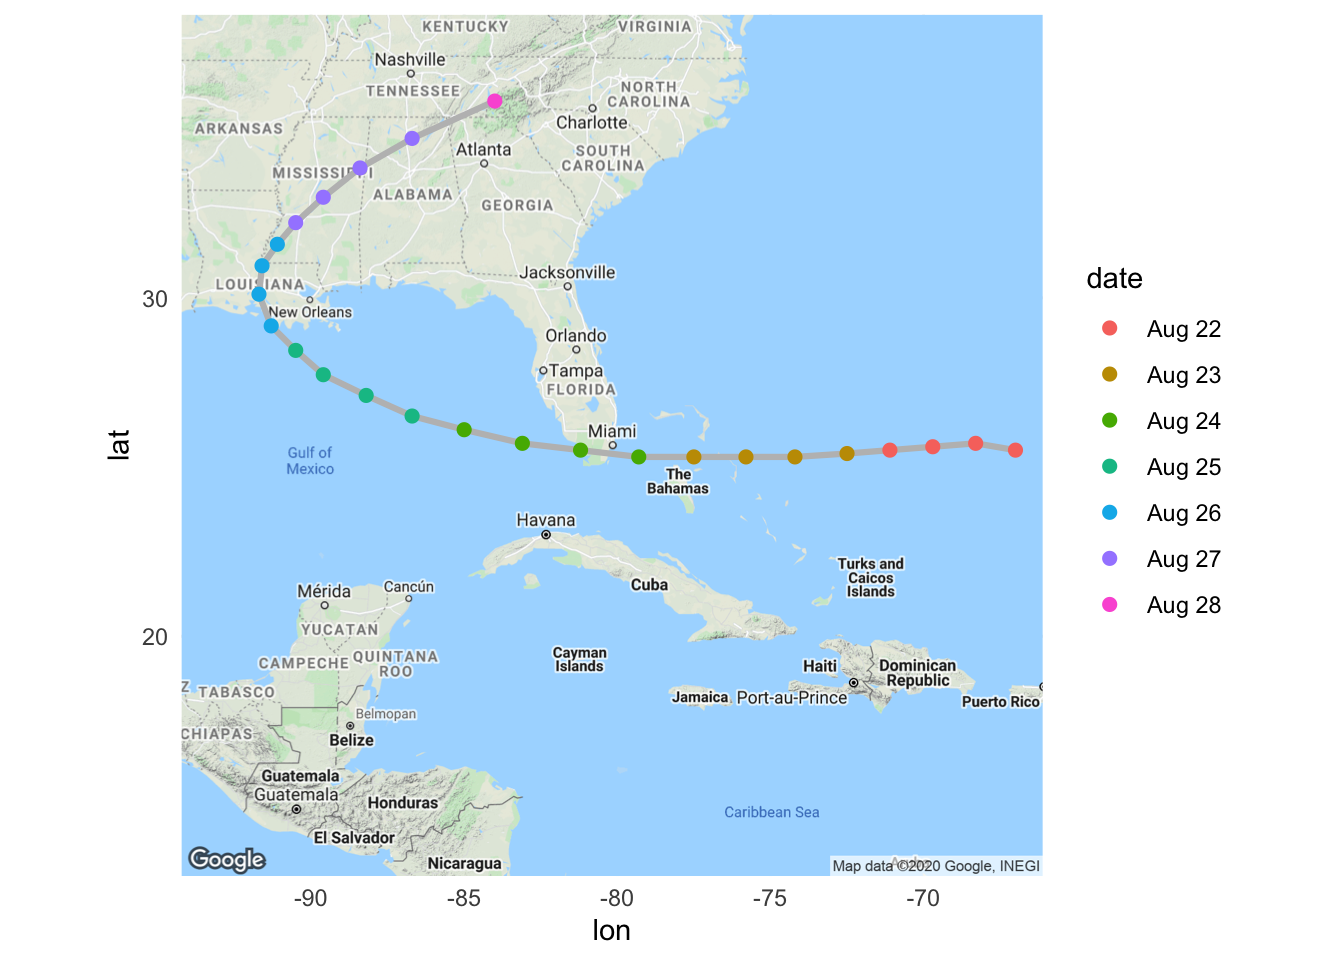 Hurricane Andrew tracks by date, based on Miami, FL, local time.